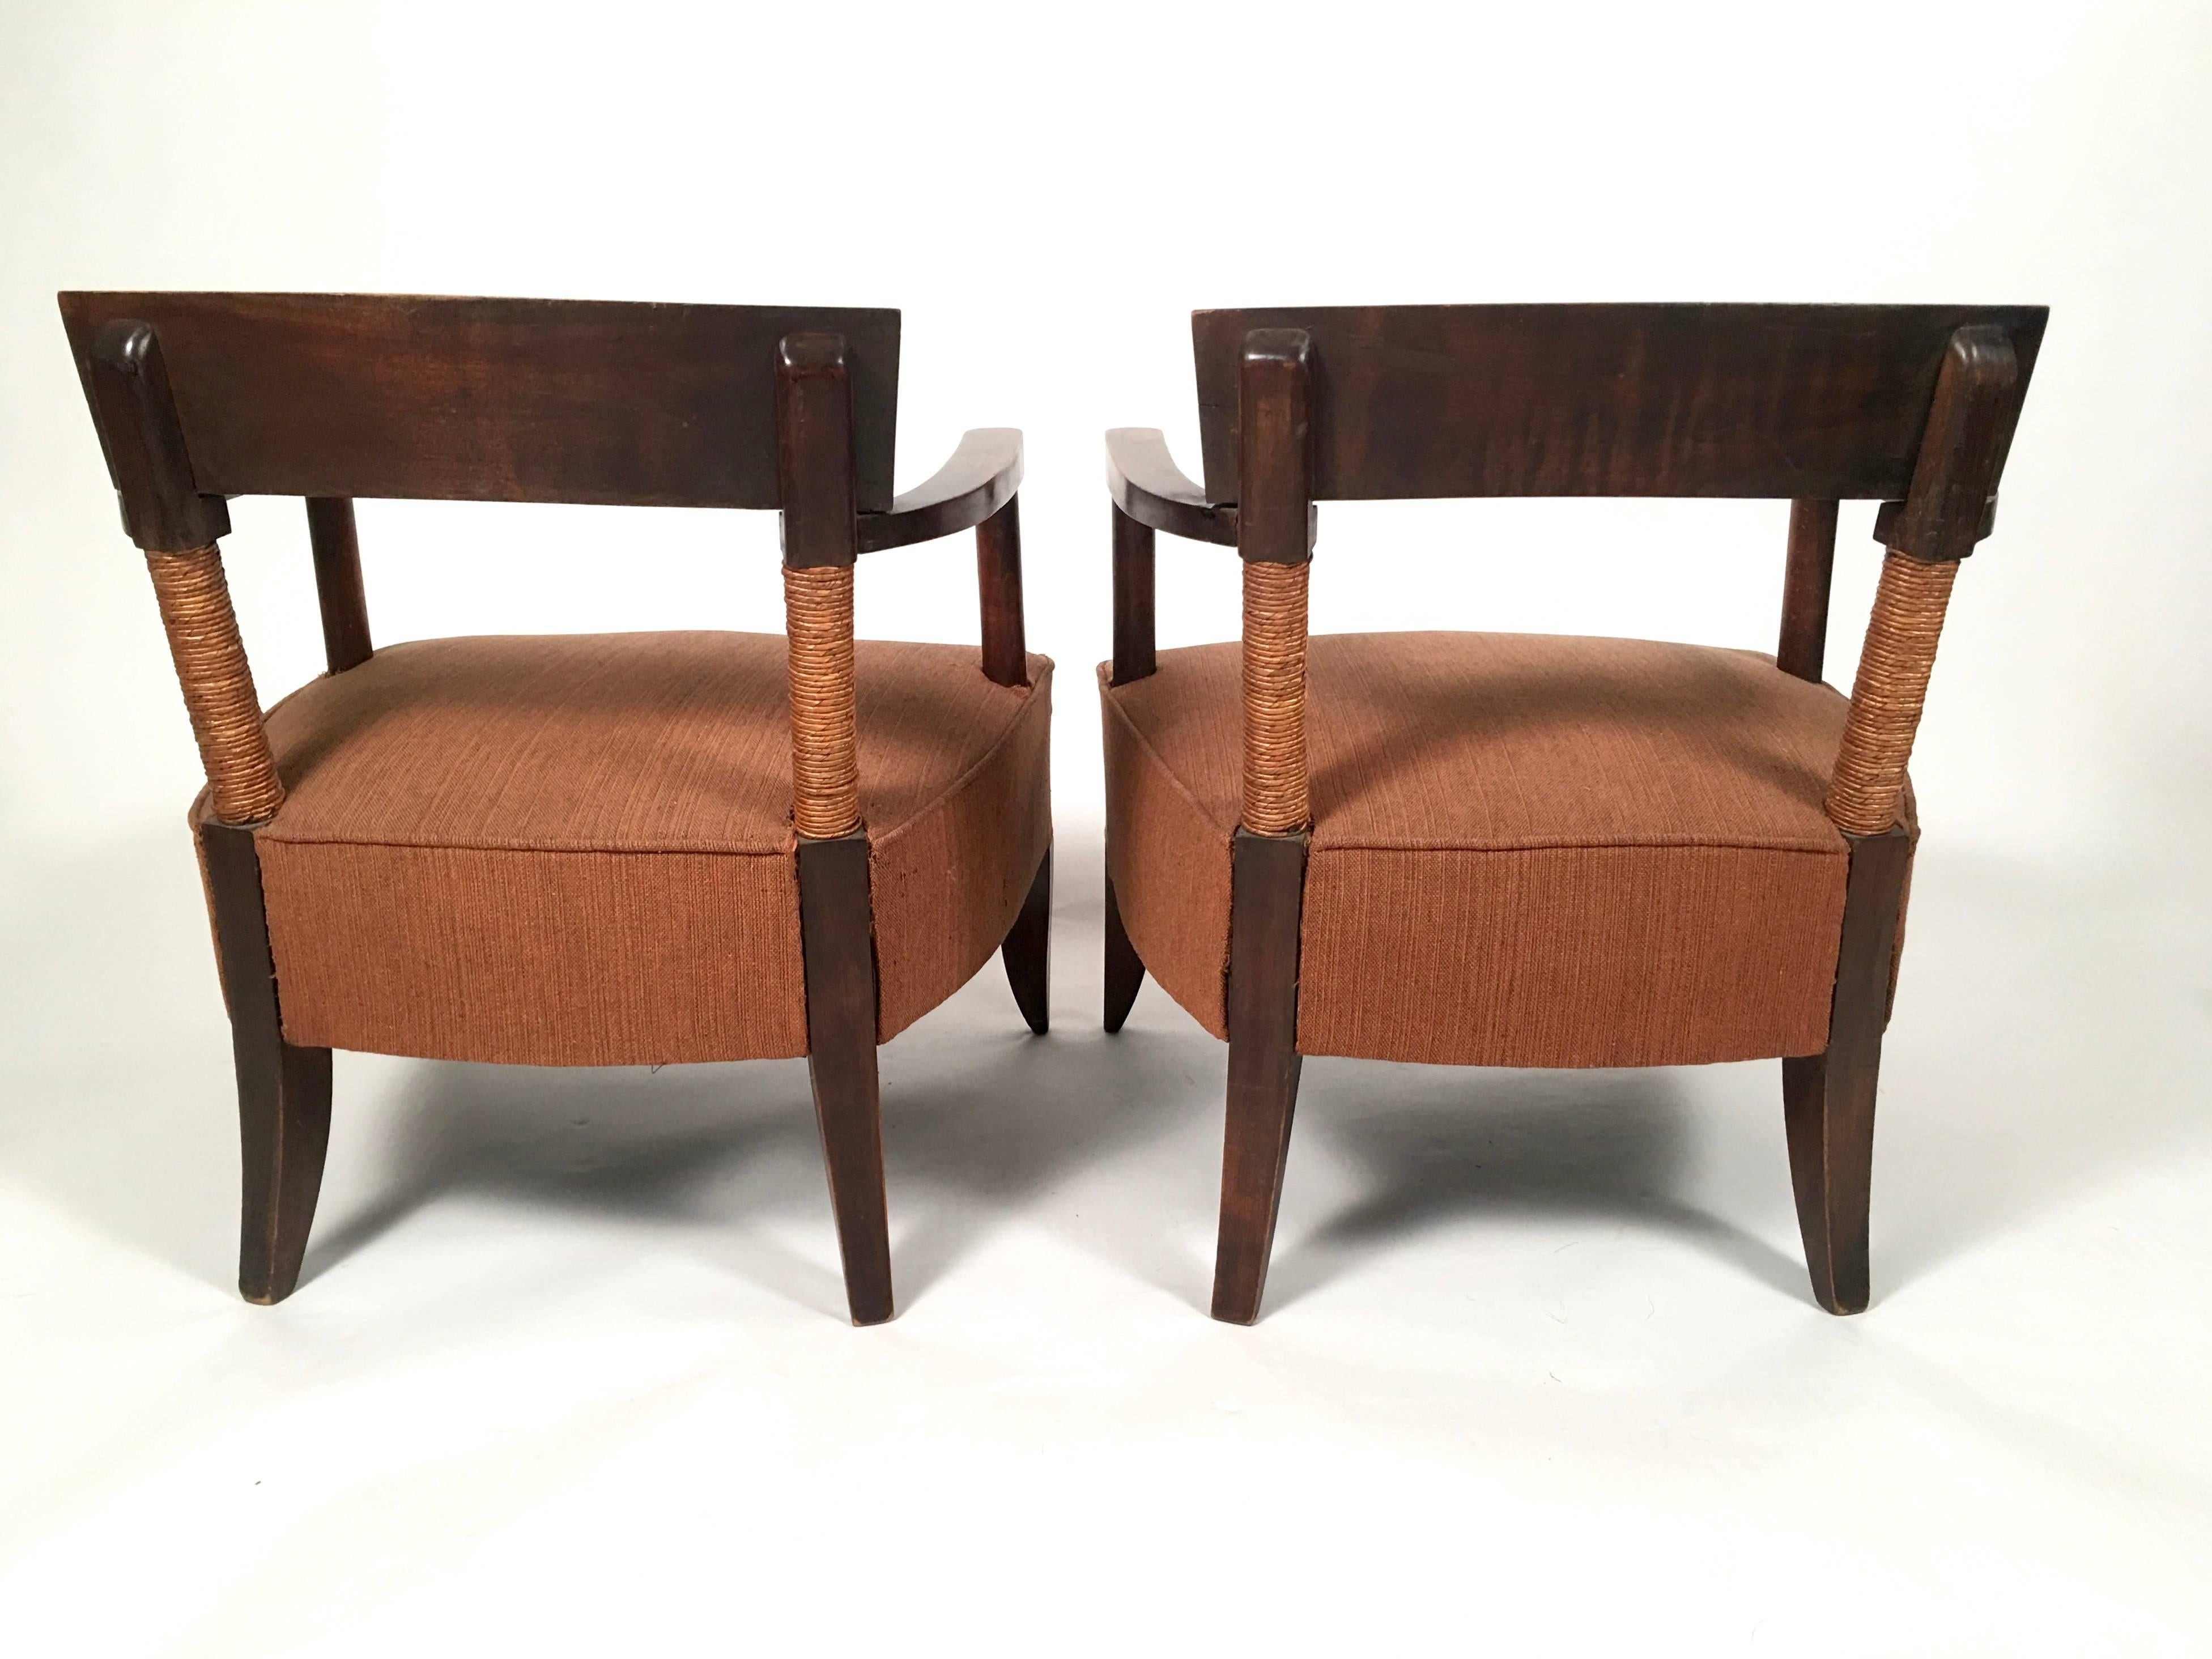 Early 20th Century Pair of French Art Deco African Inspired Oak and Paper Cord Armchairs